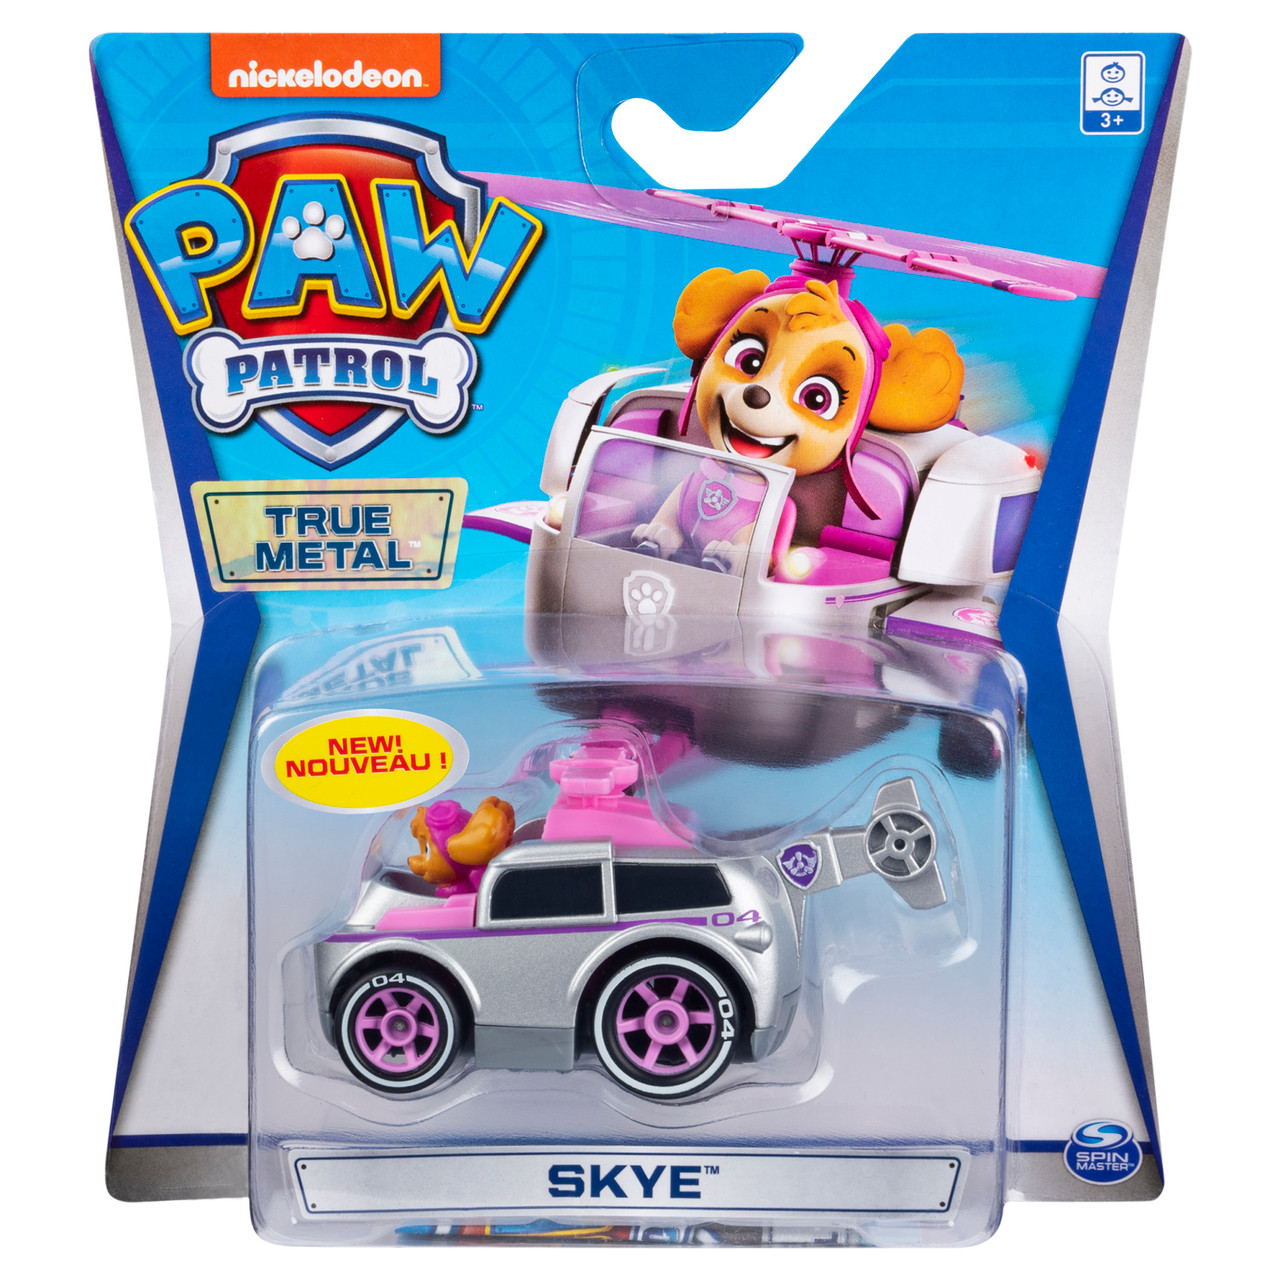 PAW Patrol, True Metal Skye Collectible Die-Cast Vehicle, Classic Series -  Mobile Advance